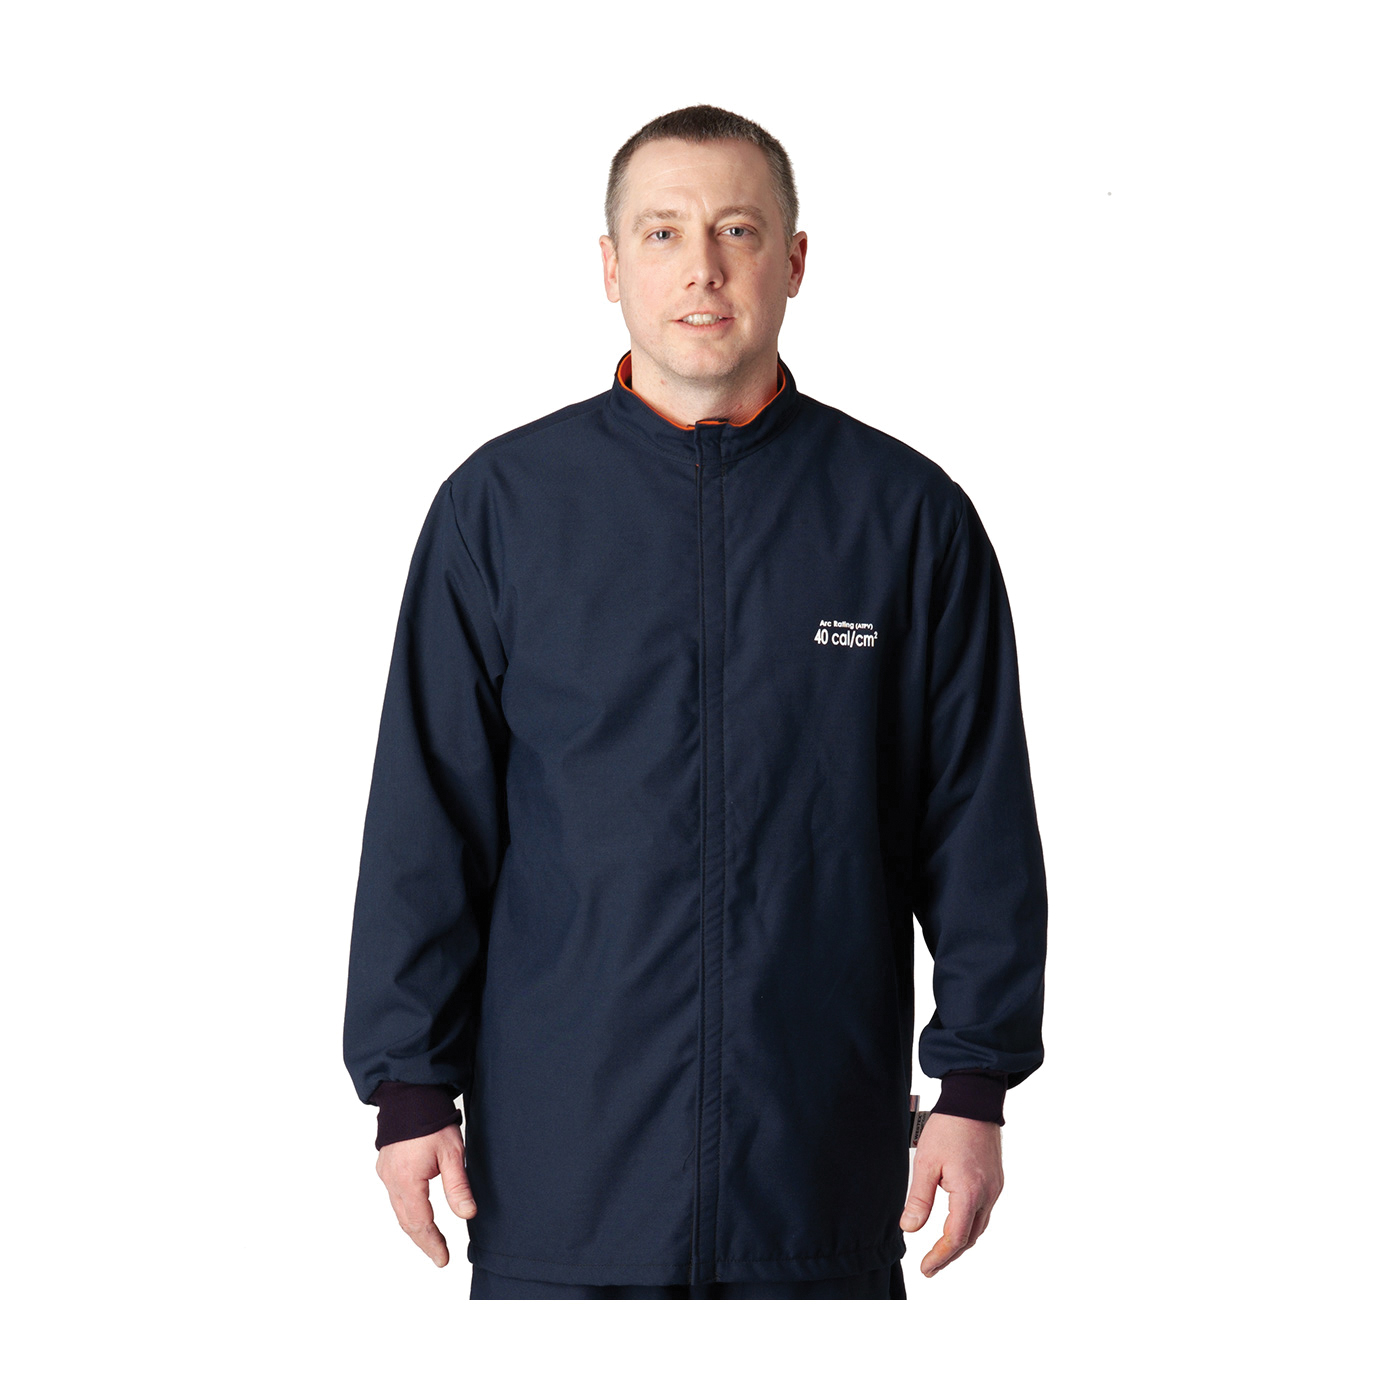 PIP® 9100-524ULT/L Ultra Light Arc and Flame Resistant Jacket, L, Navy Blue, DuPont™ Protera®/Westex® Ultrasoft, 44 to 46 in Chest, Resists: Arc and Flame, ASTM F1506-10a, ASTM F2178-12